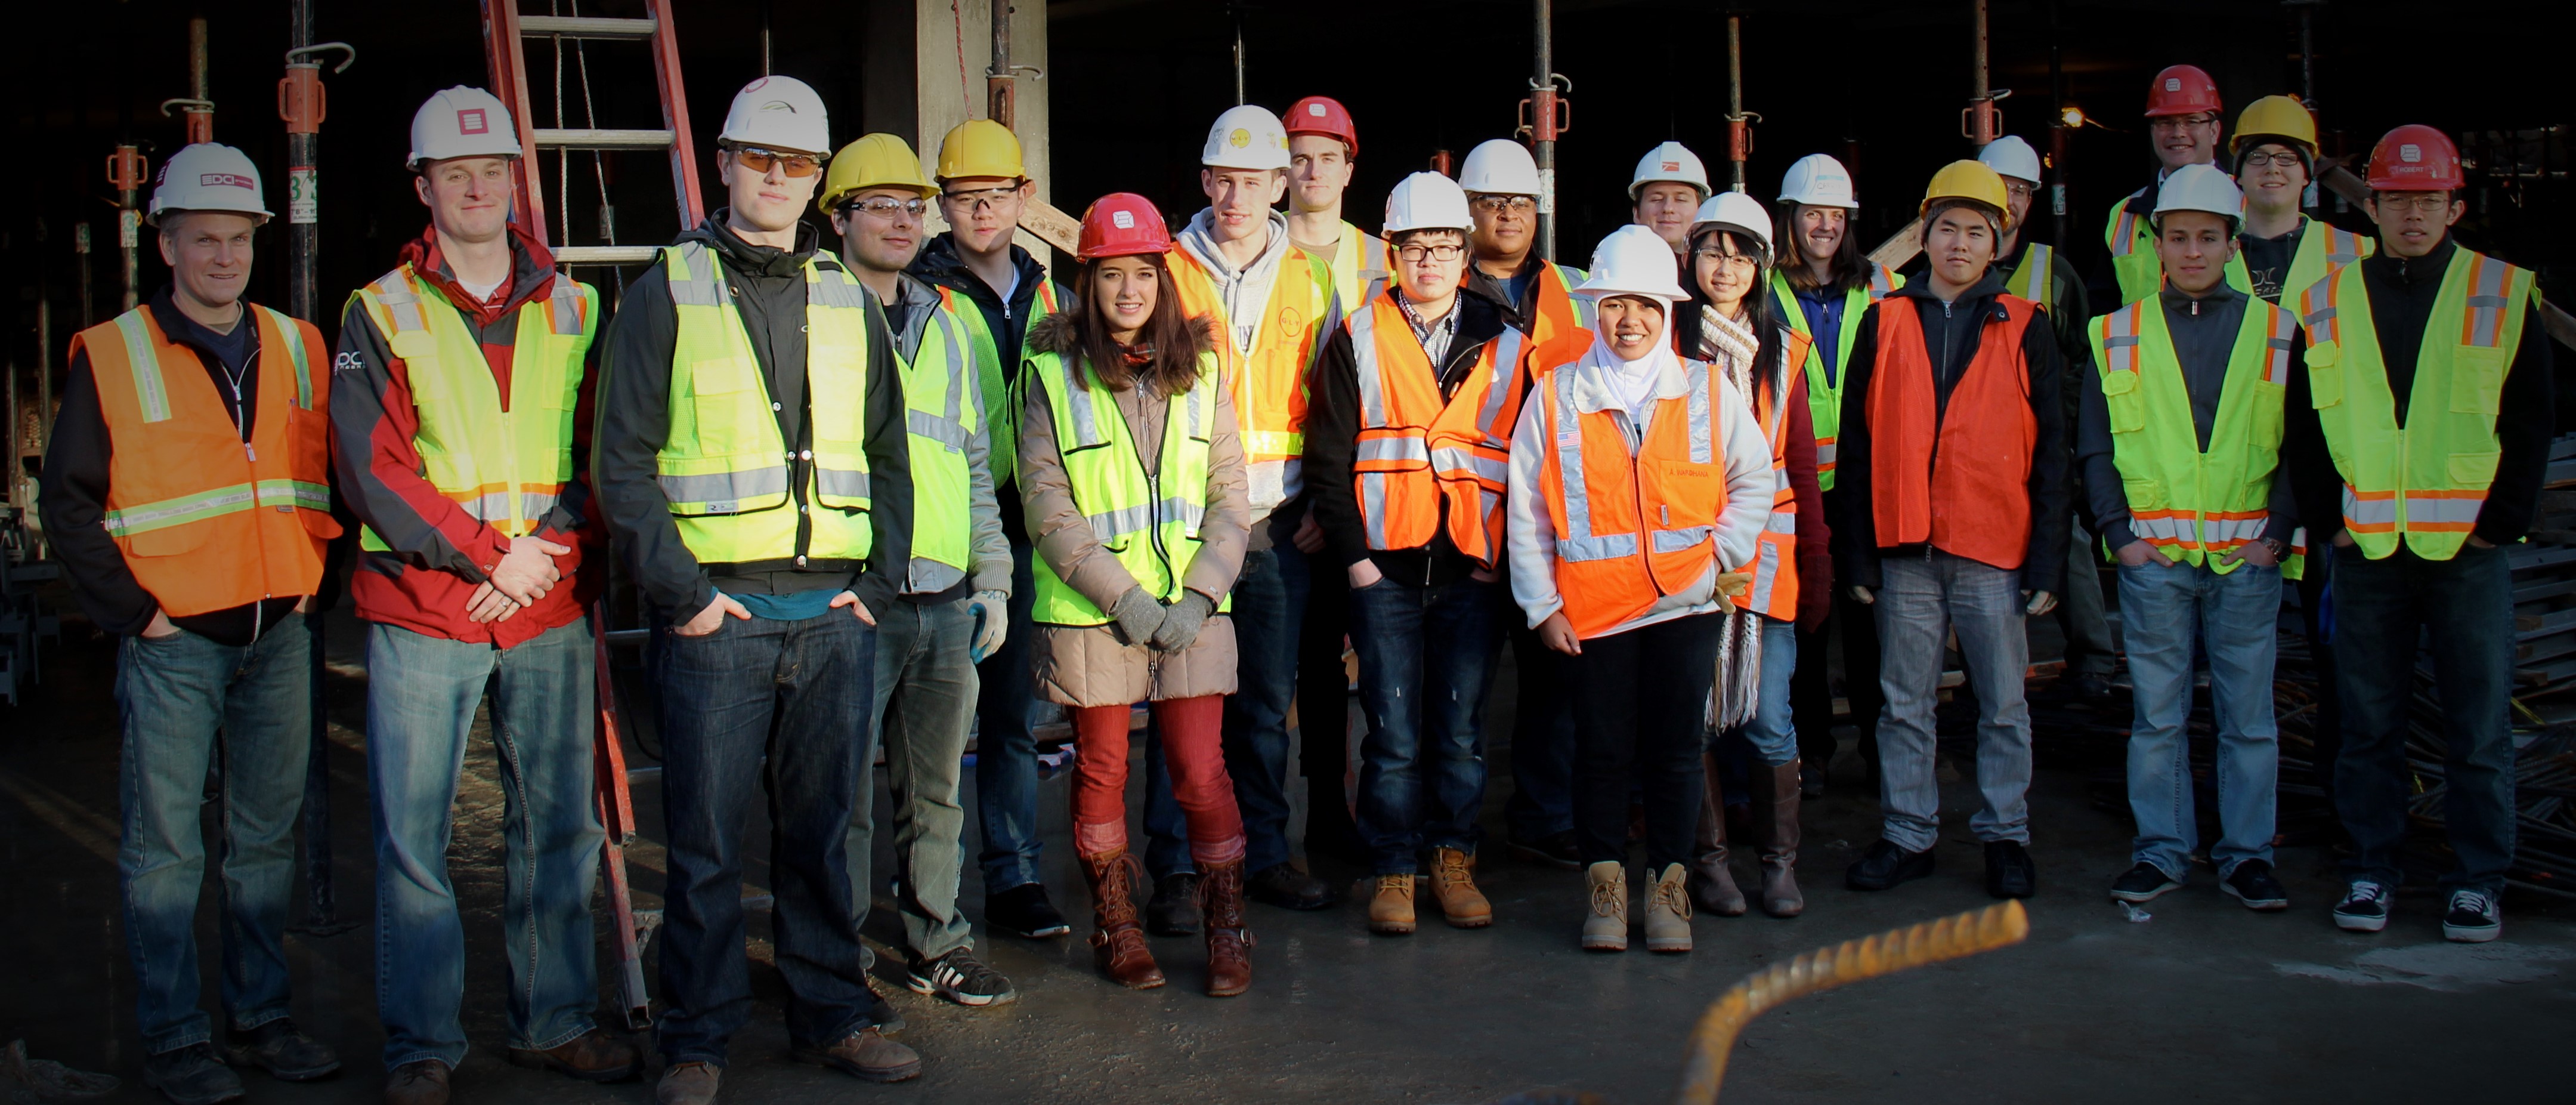 UW Construction Management students on a work site.